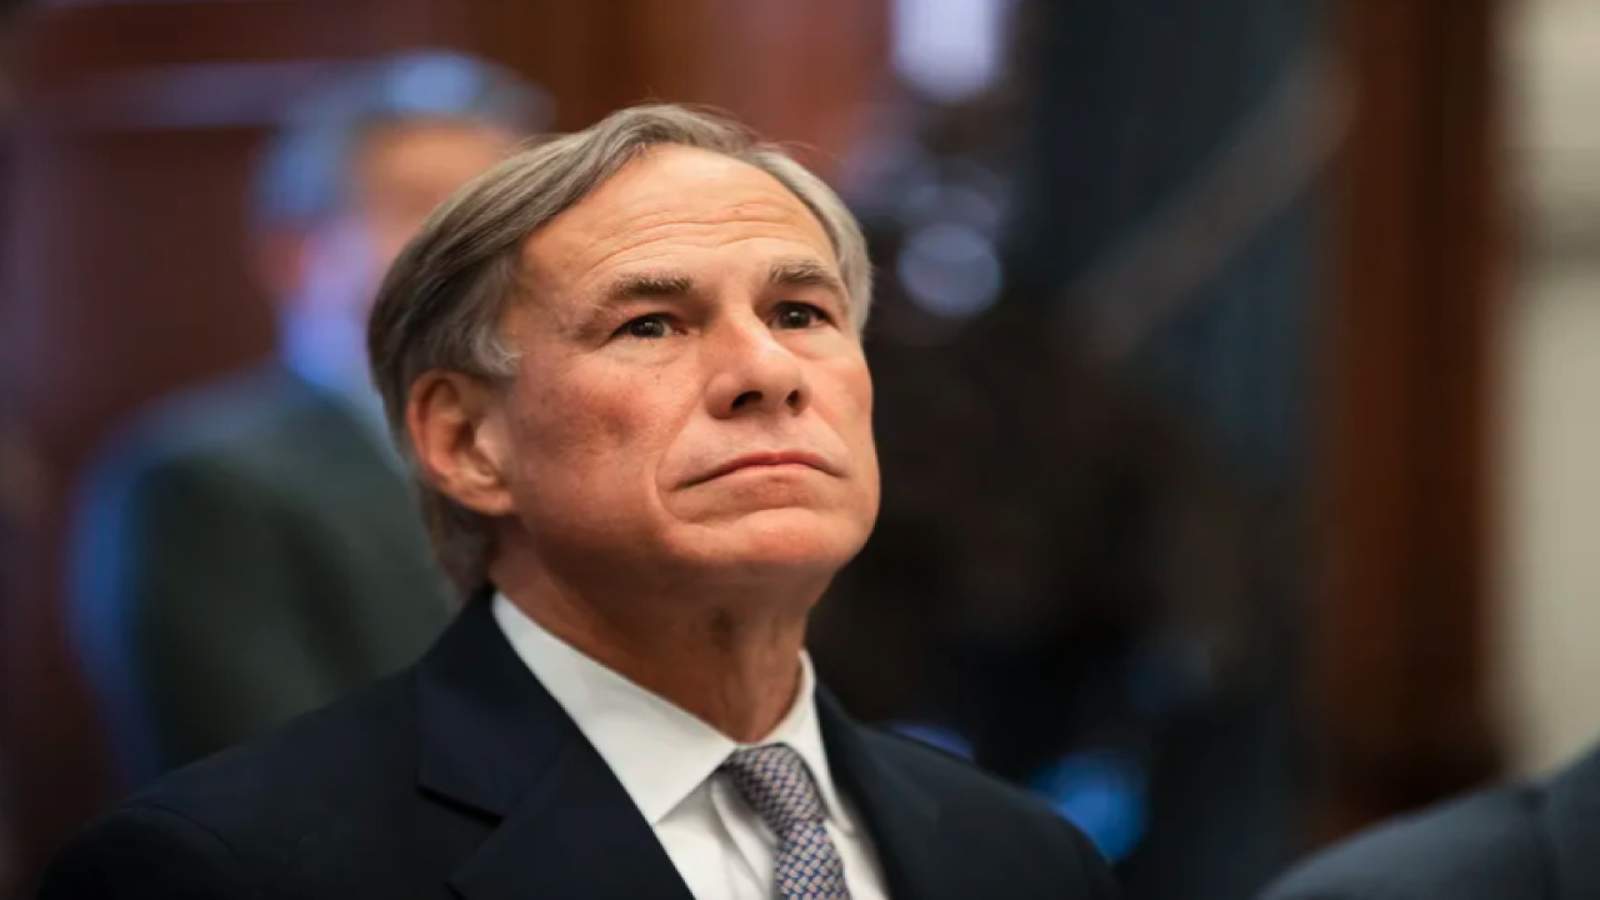 WATCH: KSAT interview with Governor Greg Abbott at 12:30 p.m. Tuesday